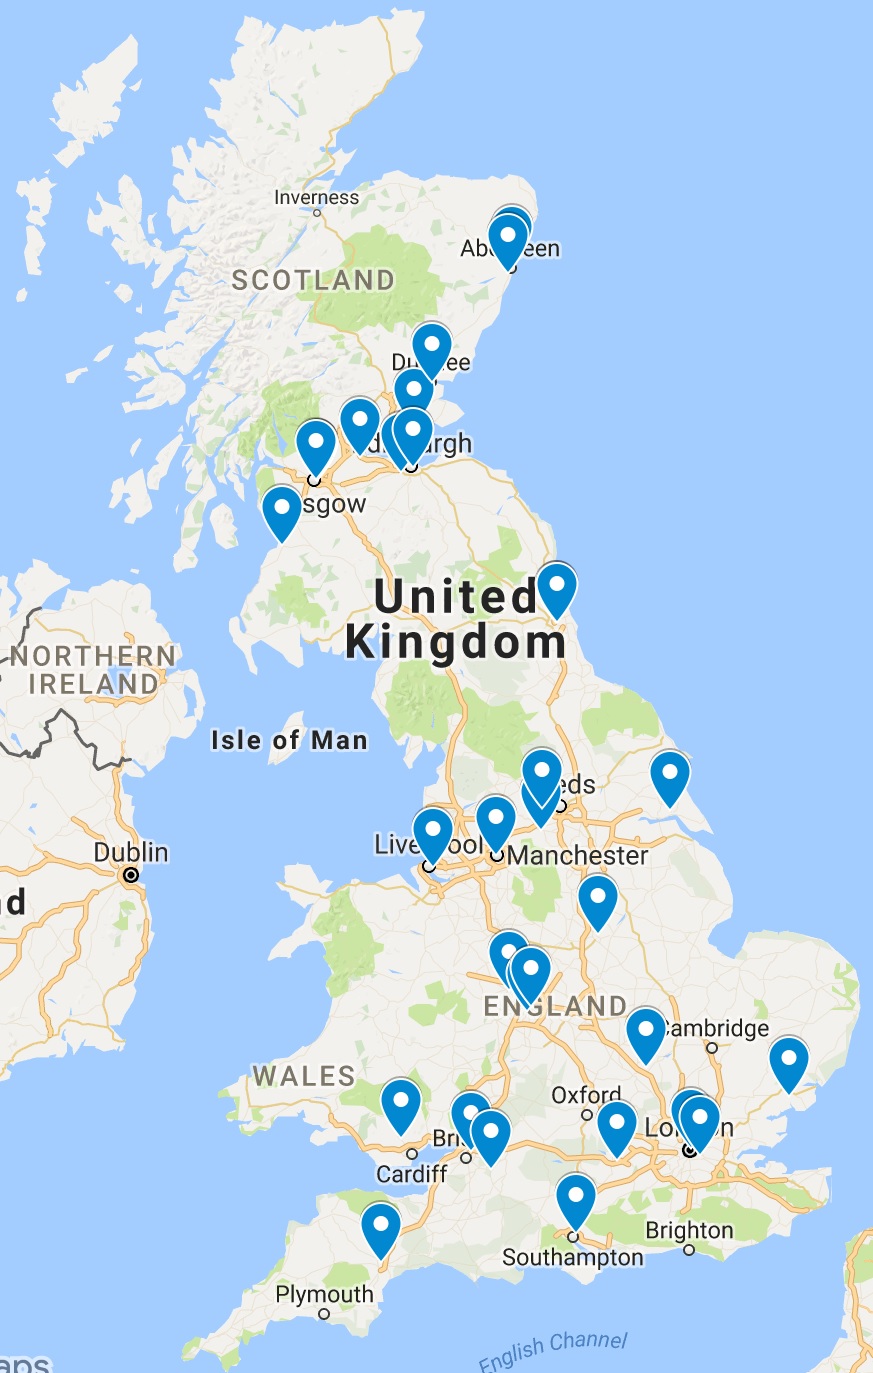 Map showing wide geographic spread of institutions represented from across the UK